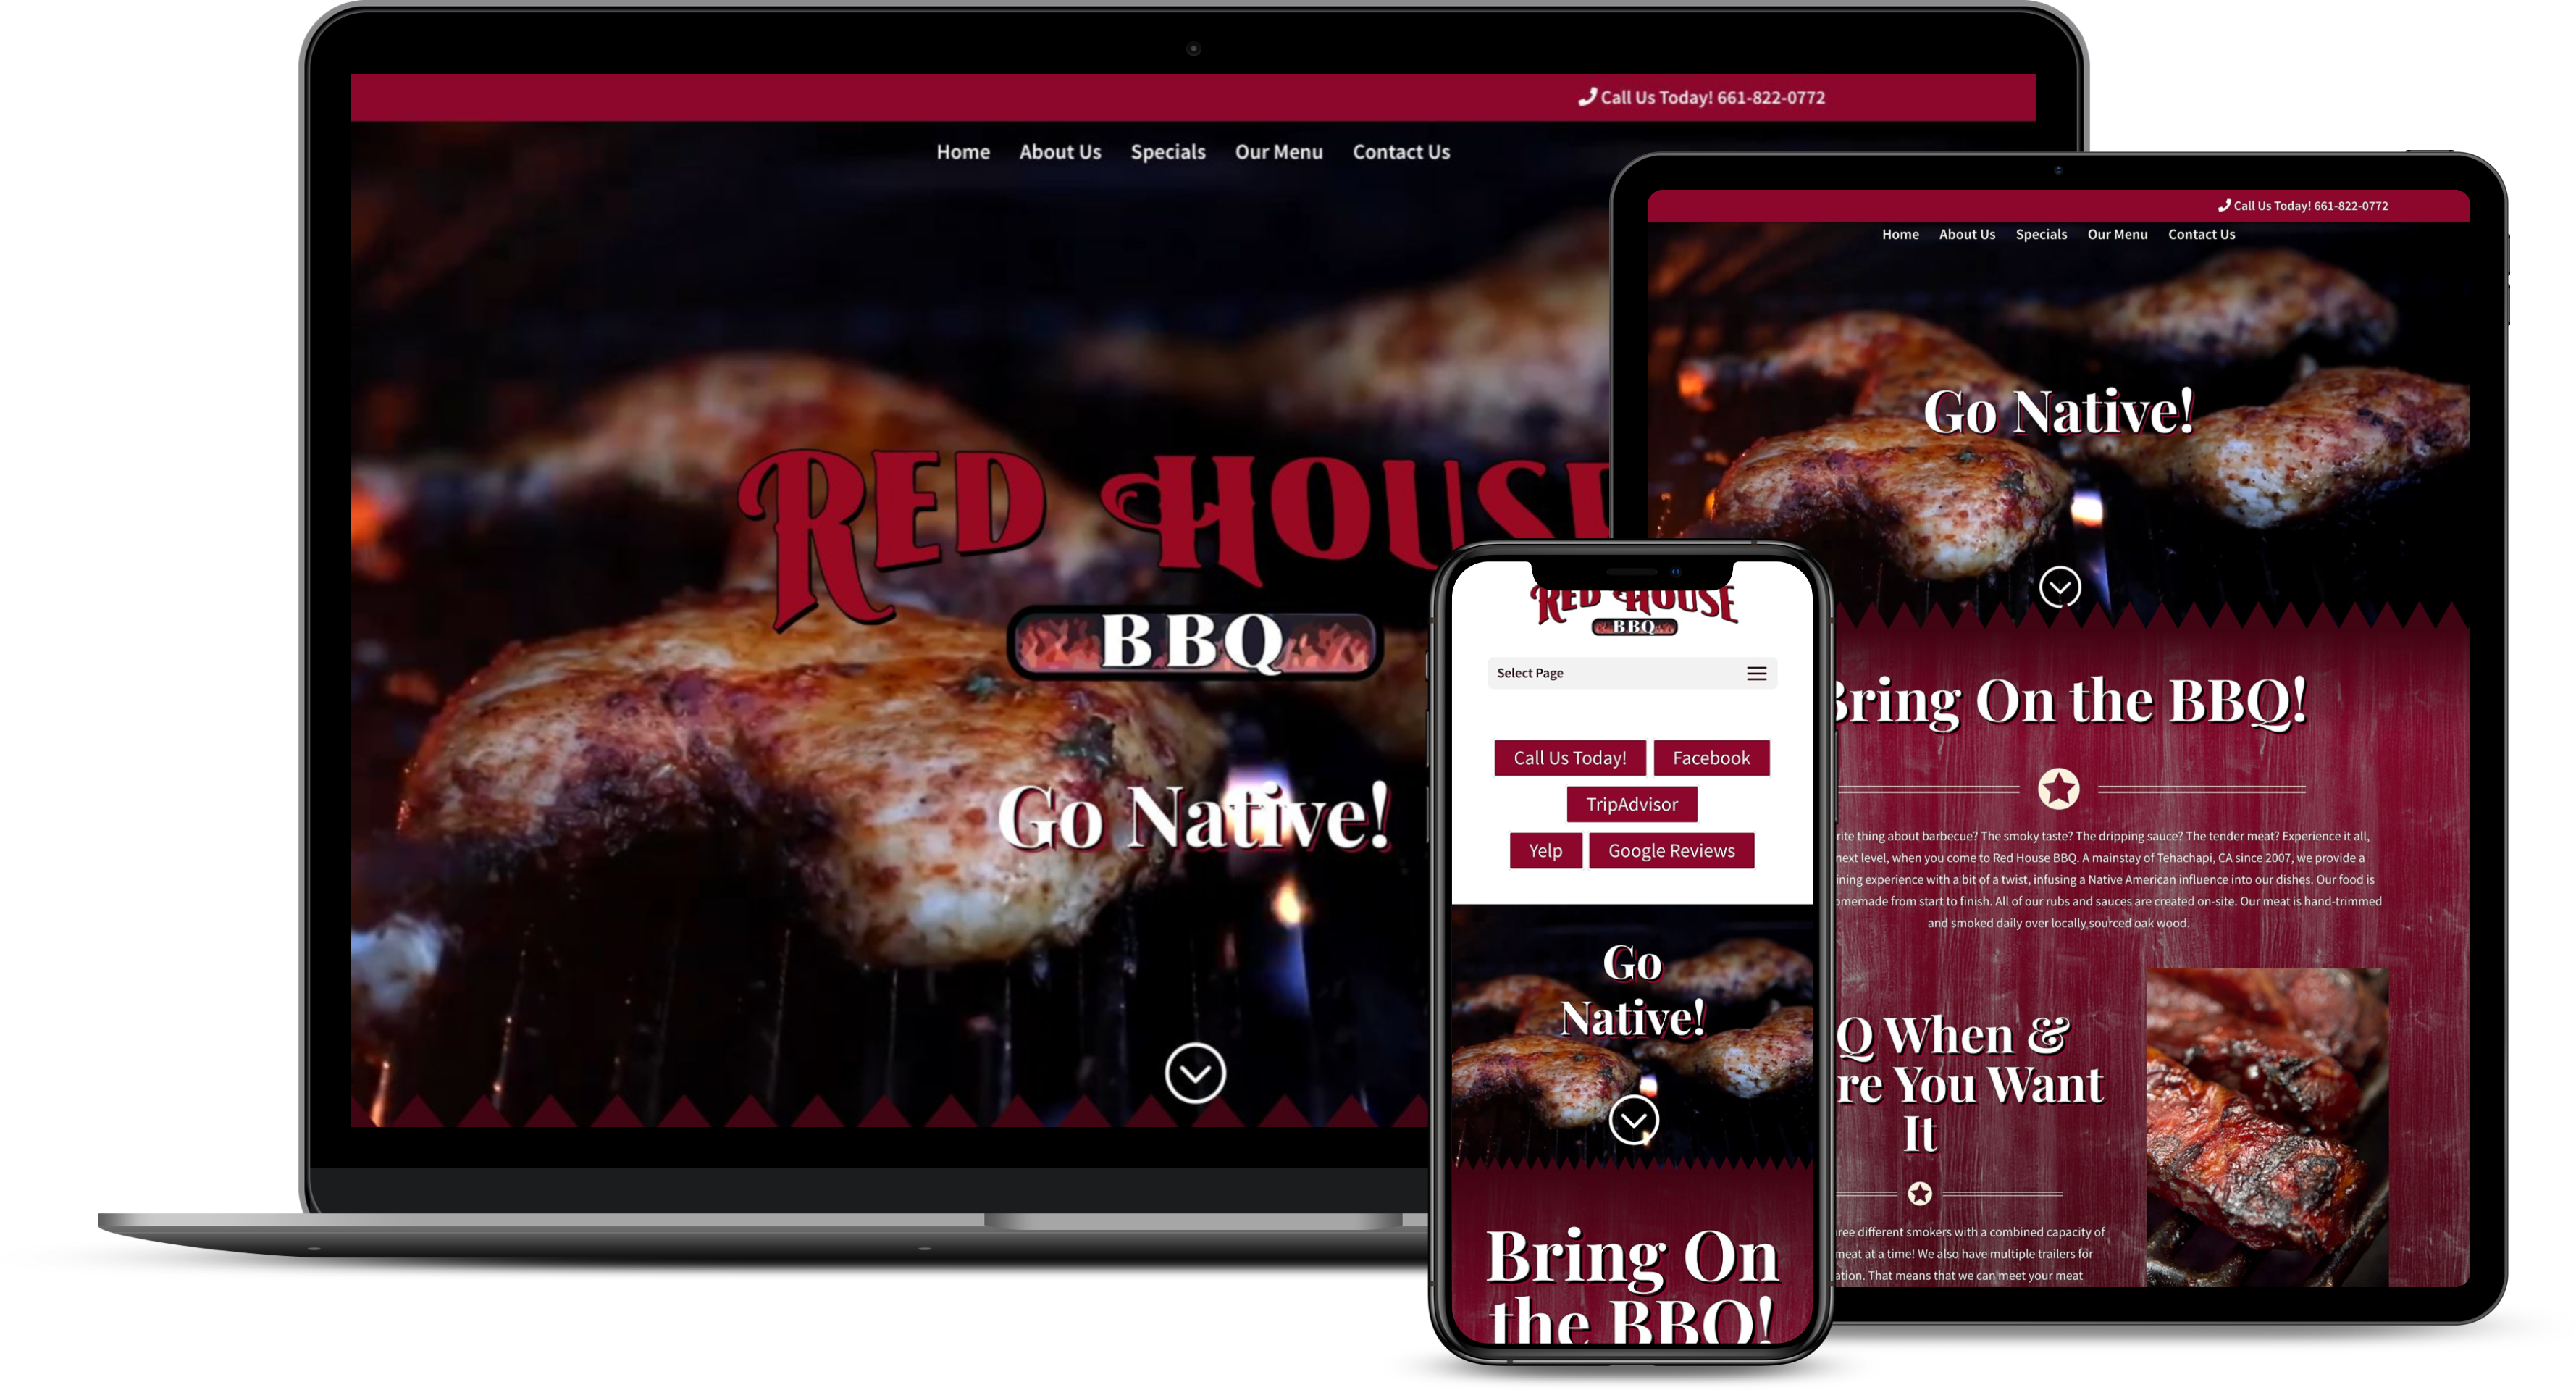 Red House BBQ